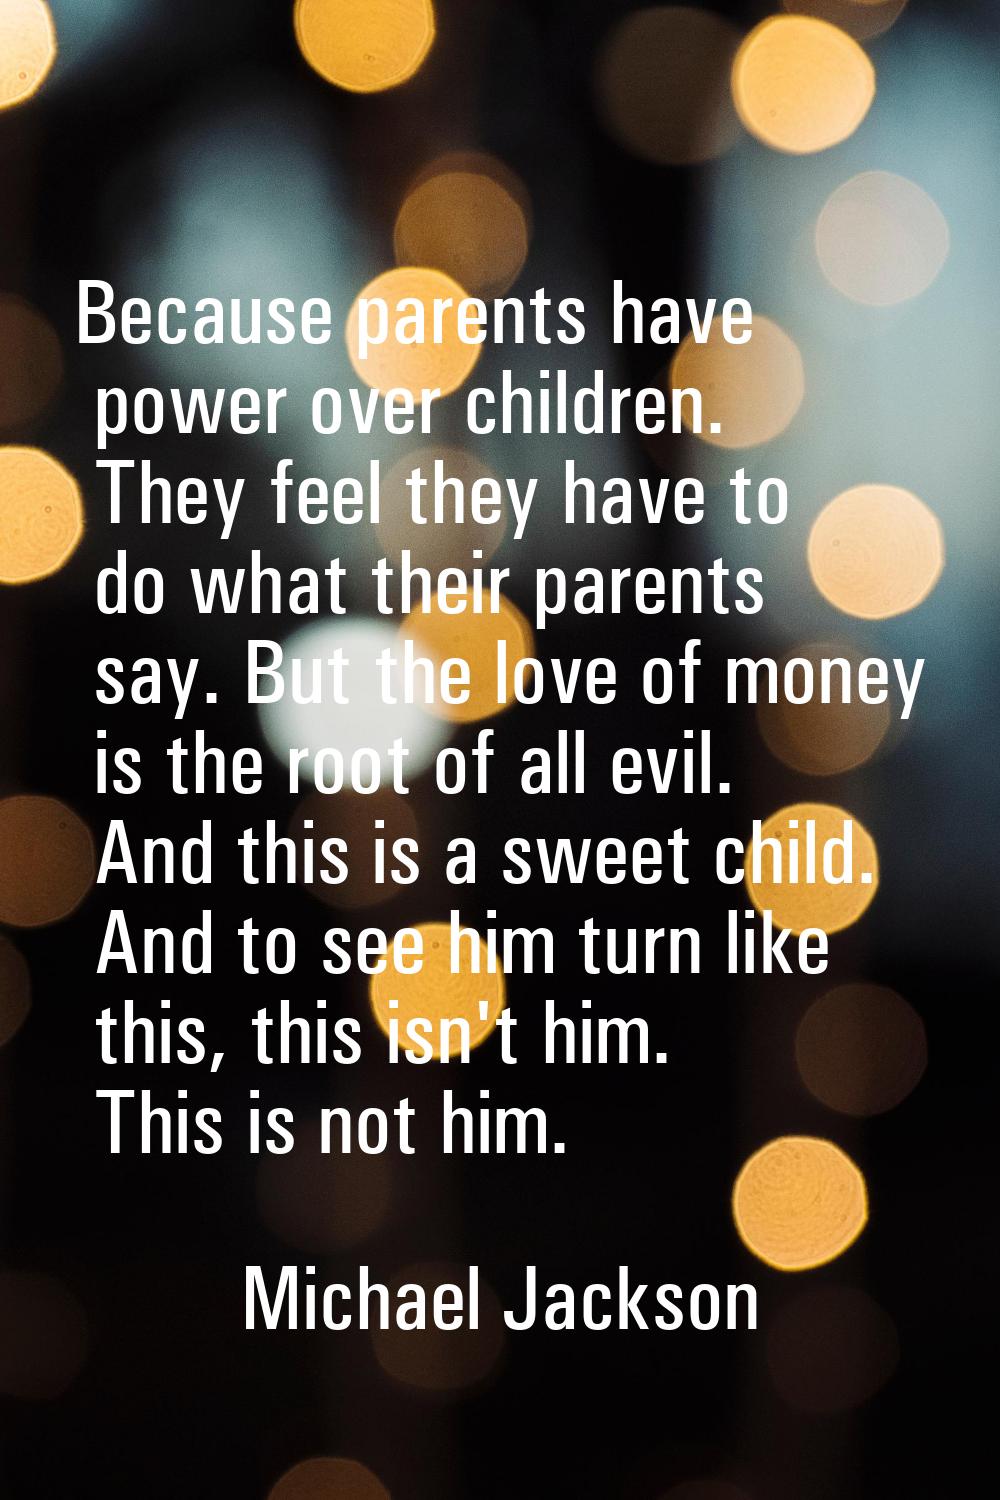 Because parents have power over children. They feel they have to do what their parents say. But the